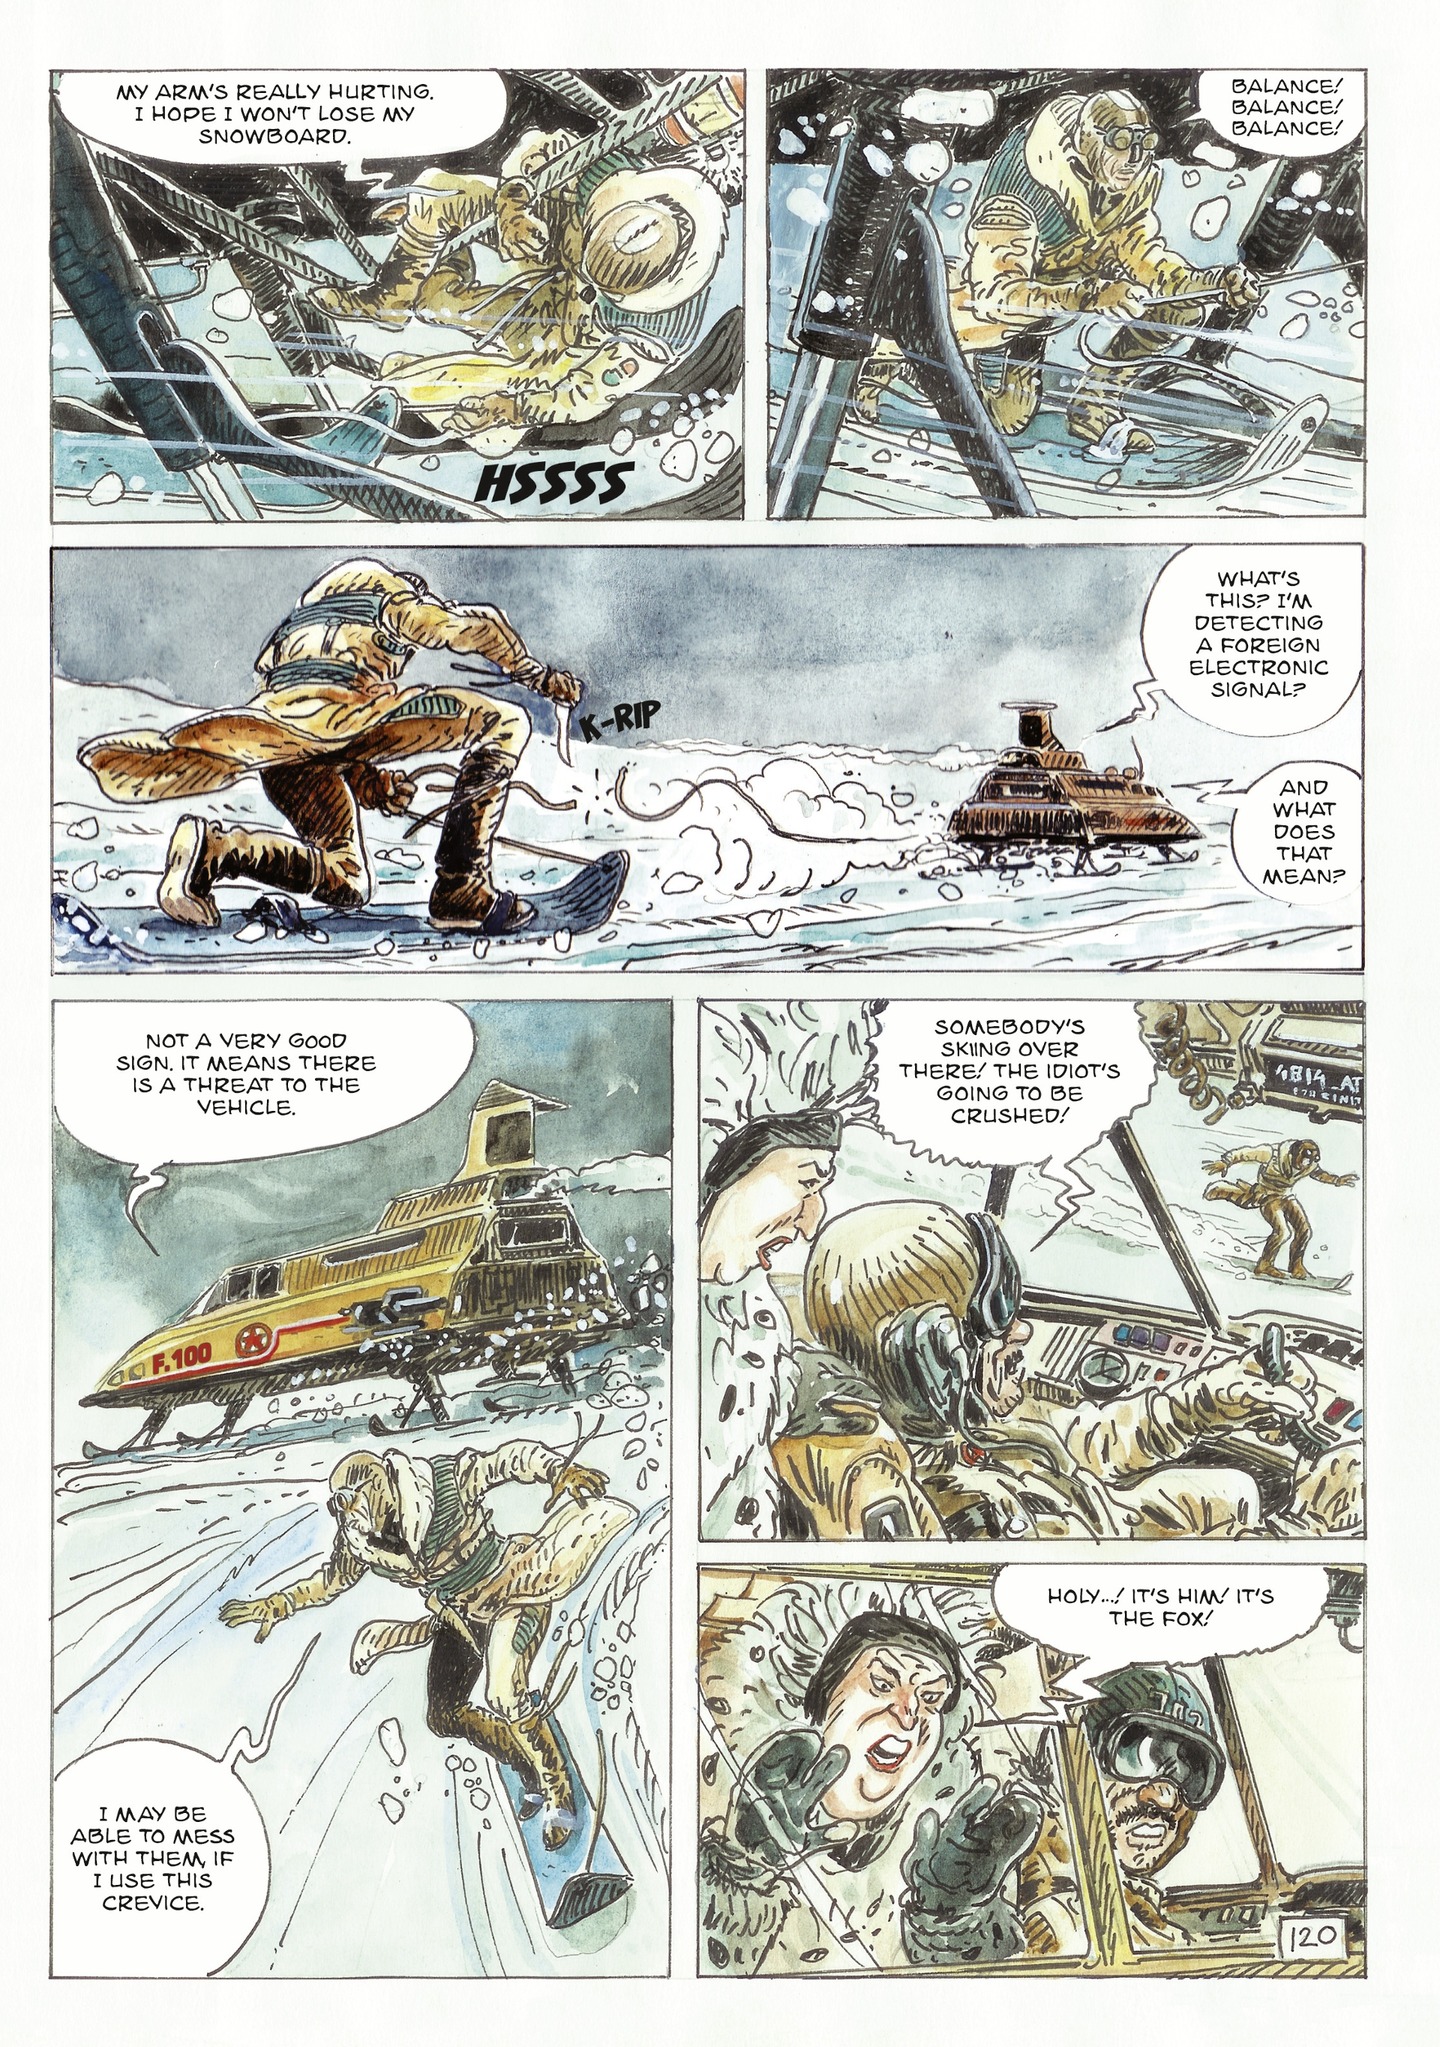 Read online The Man With the Bear comic -  Issue #2 - 66